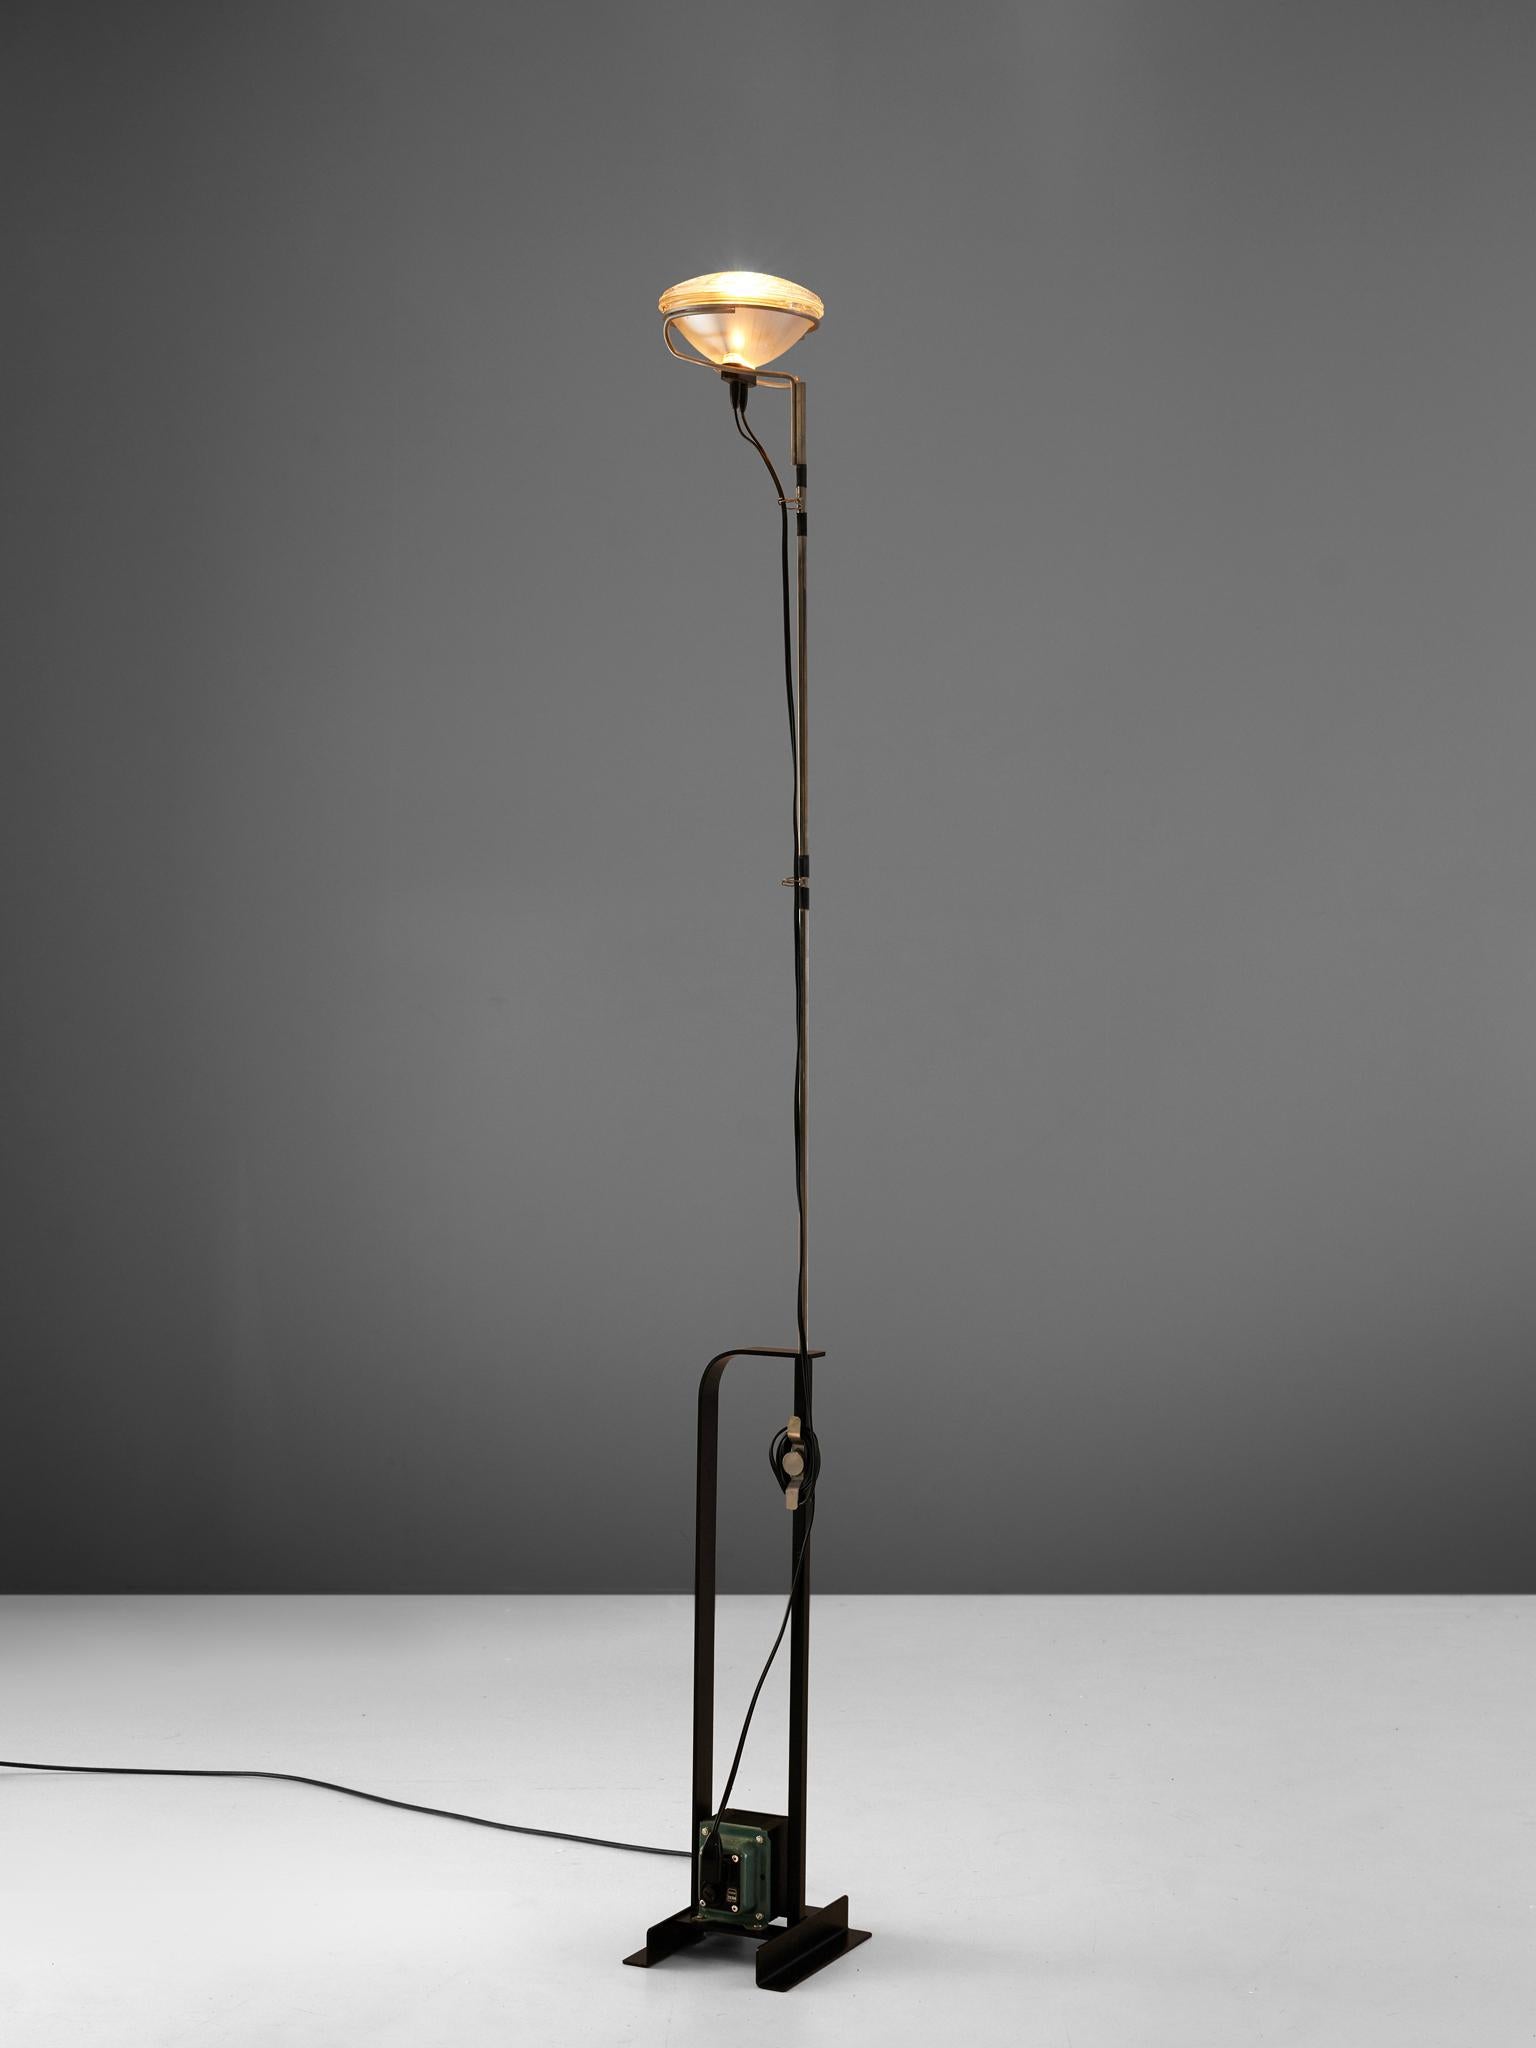 Achille et Pier Castiglioni for FLOS, 'Toio' floor lamp, metal and chrome, Italy, 1962.

A floor lamp that encompasses Castiglioni's idea of a ready-made concept. A car headlight is used as lamphead. The foot consists of a transformer, which gives